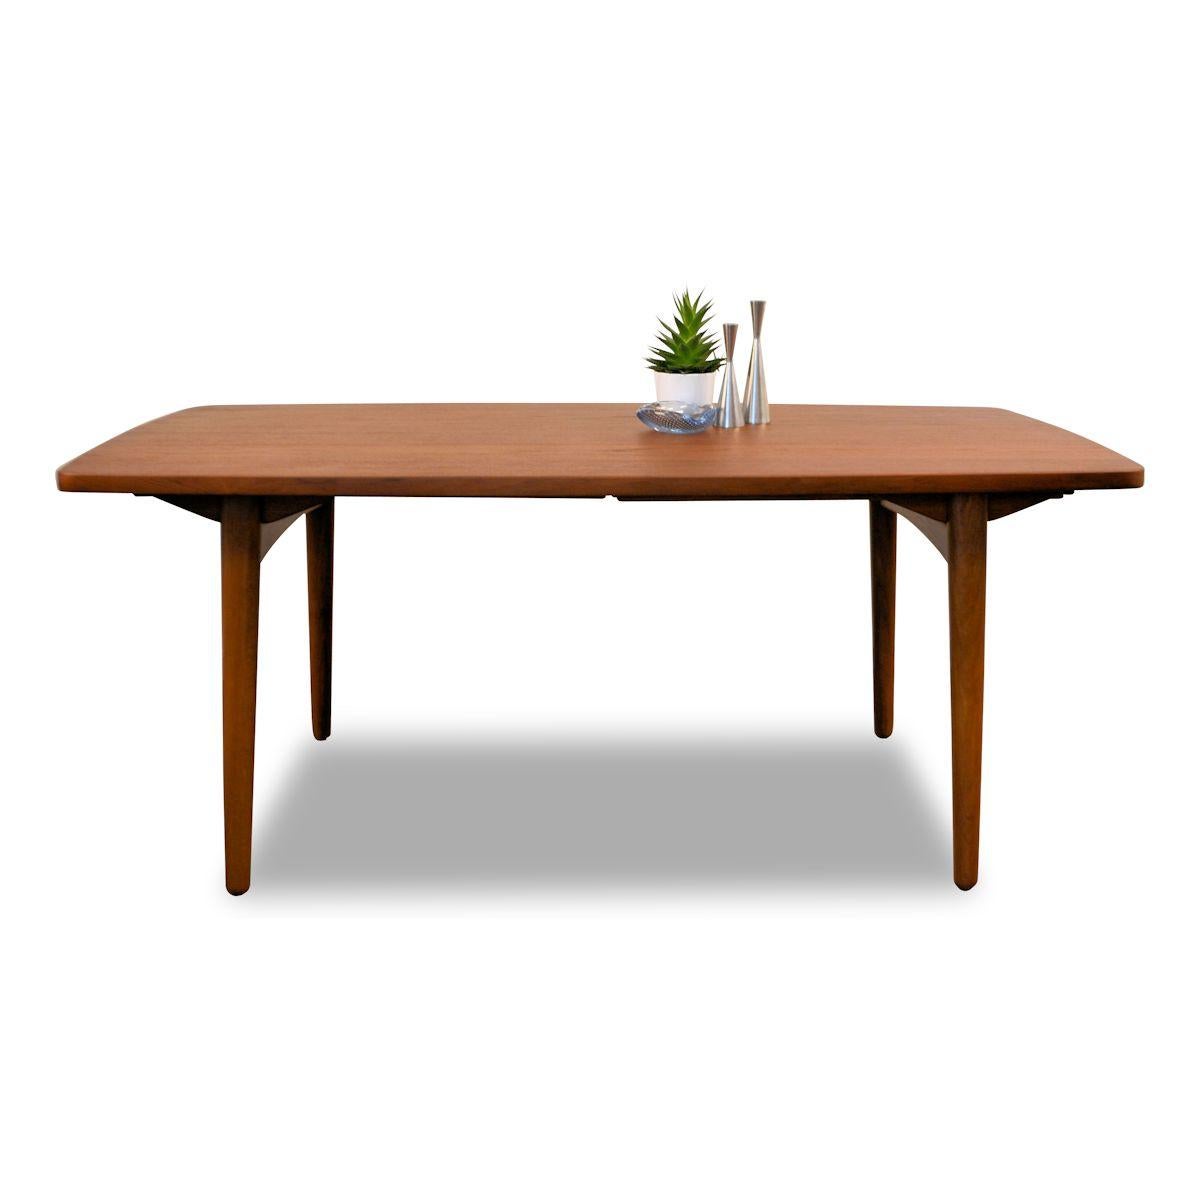 Stylish vintage Danish teak dining table designed by L. Chr. Larsen & Son. This rare table features a thick beautifullly grained teak top on solid but stylish oak legs. You’ll easily host a a party of ten with the two extension pieces, adding 82 cm